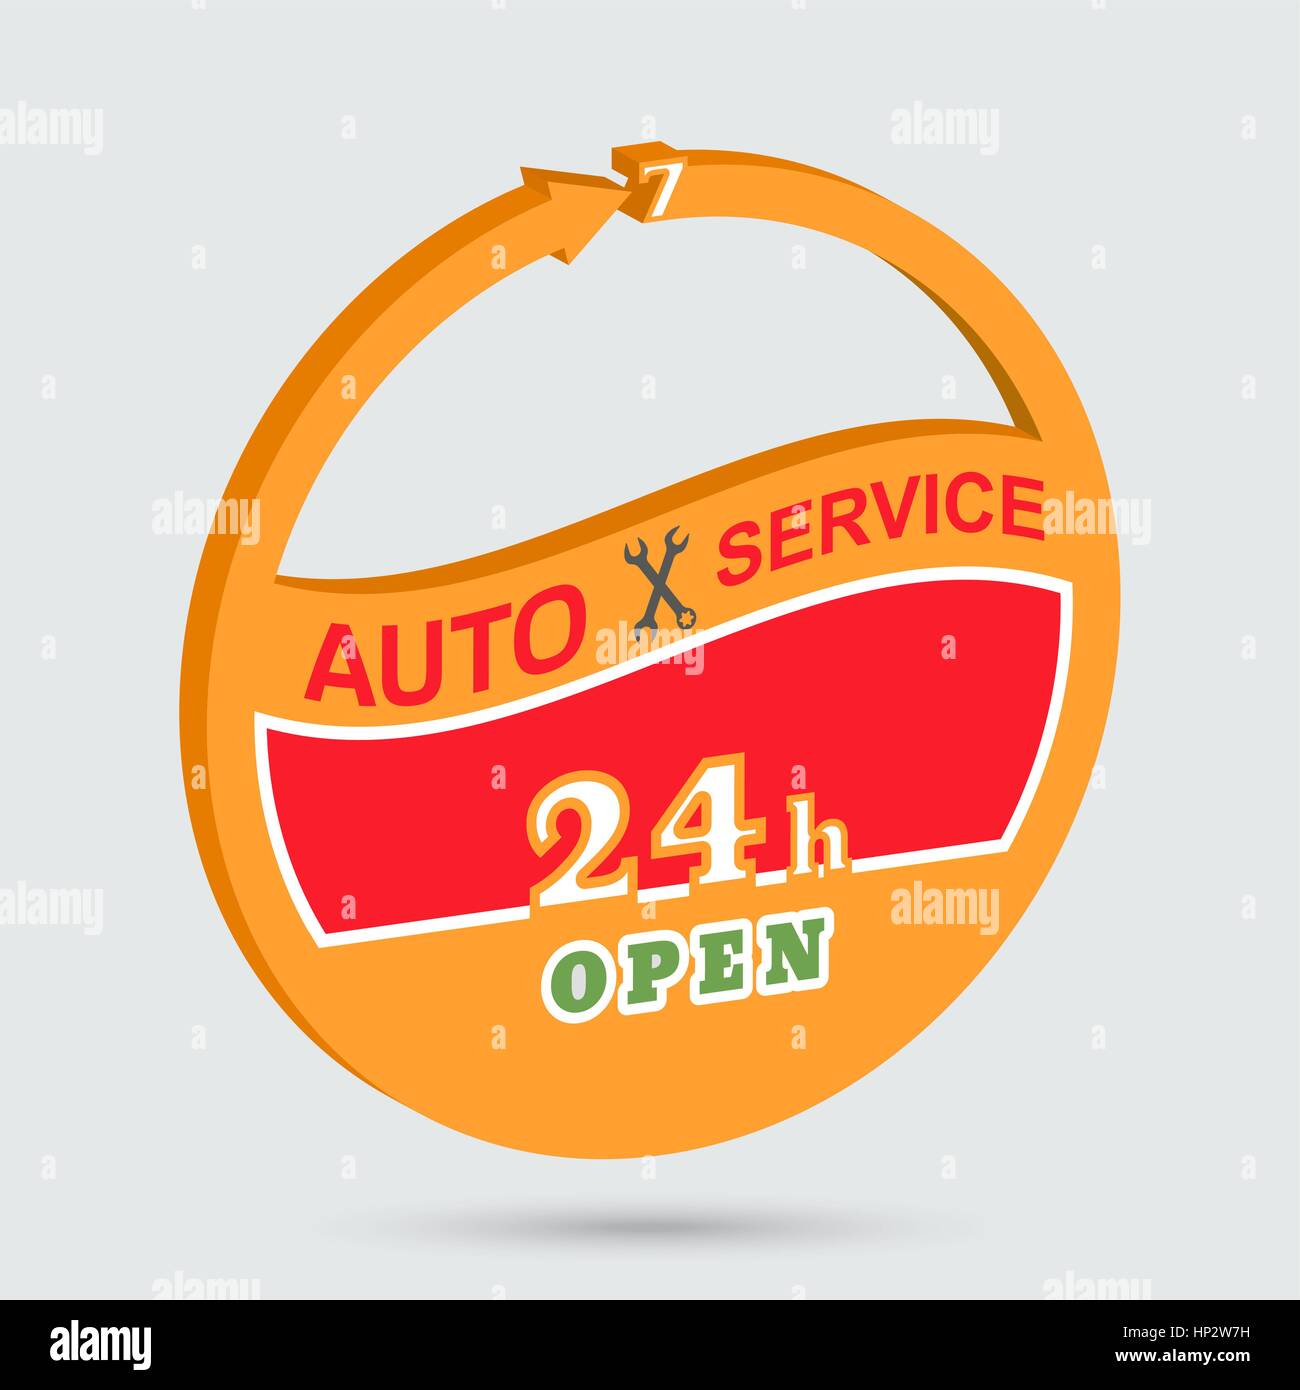 Auto service isometric icon. Station of maintenance emblem. Round the clock car repairs. Design can be used as a logo, a poster, advertising, singboar Stock Vector